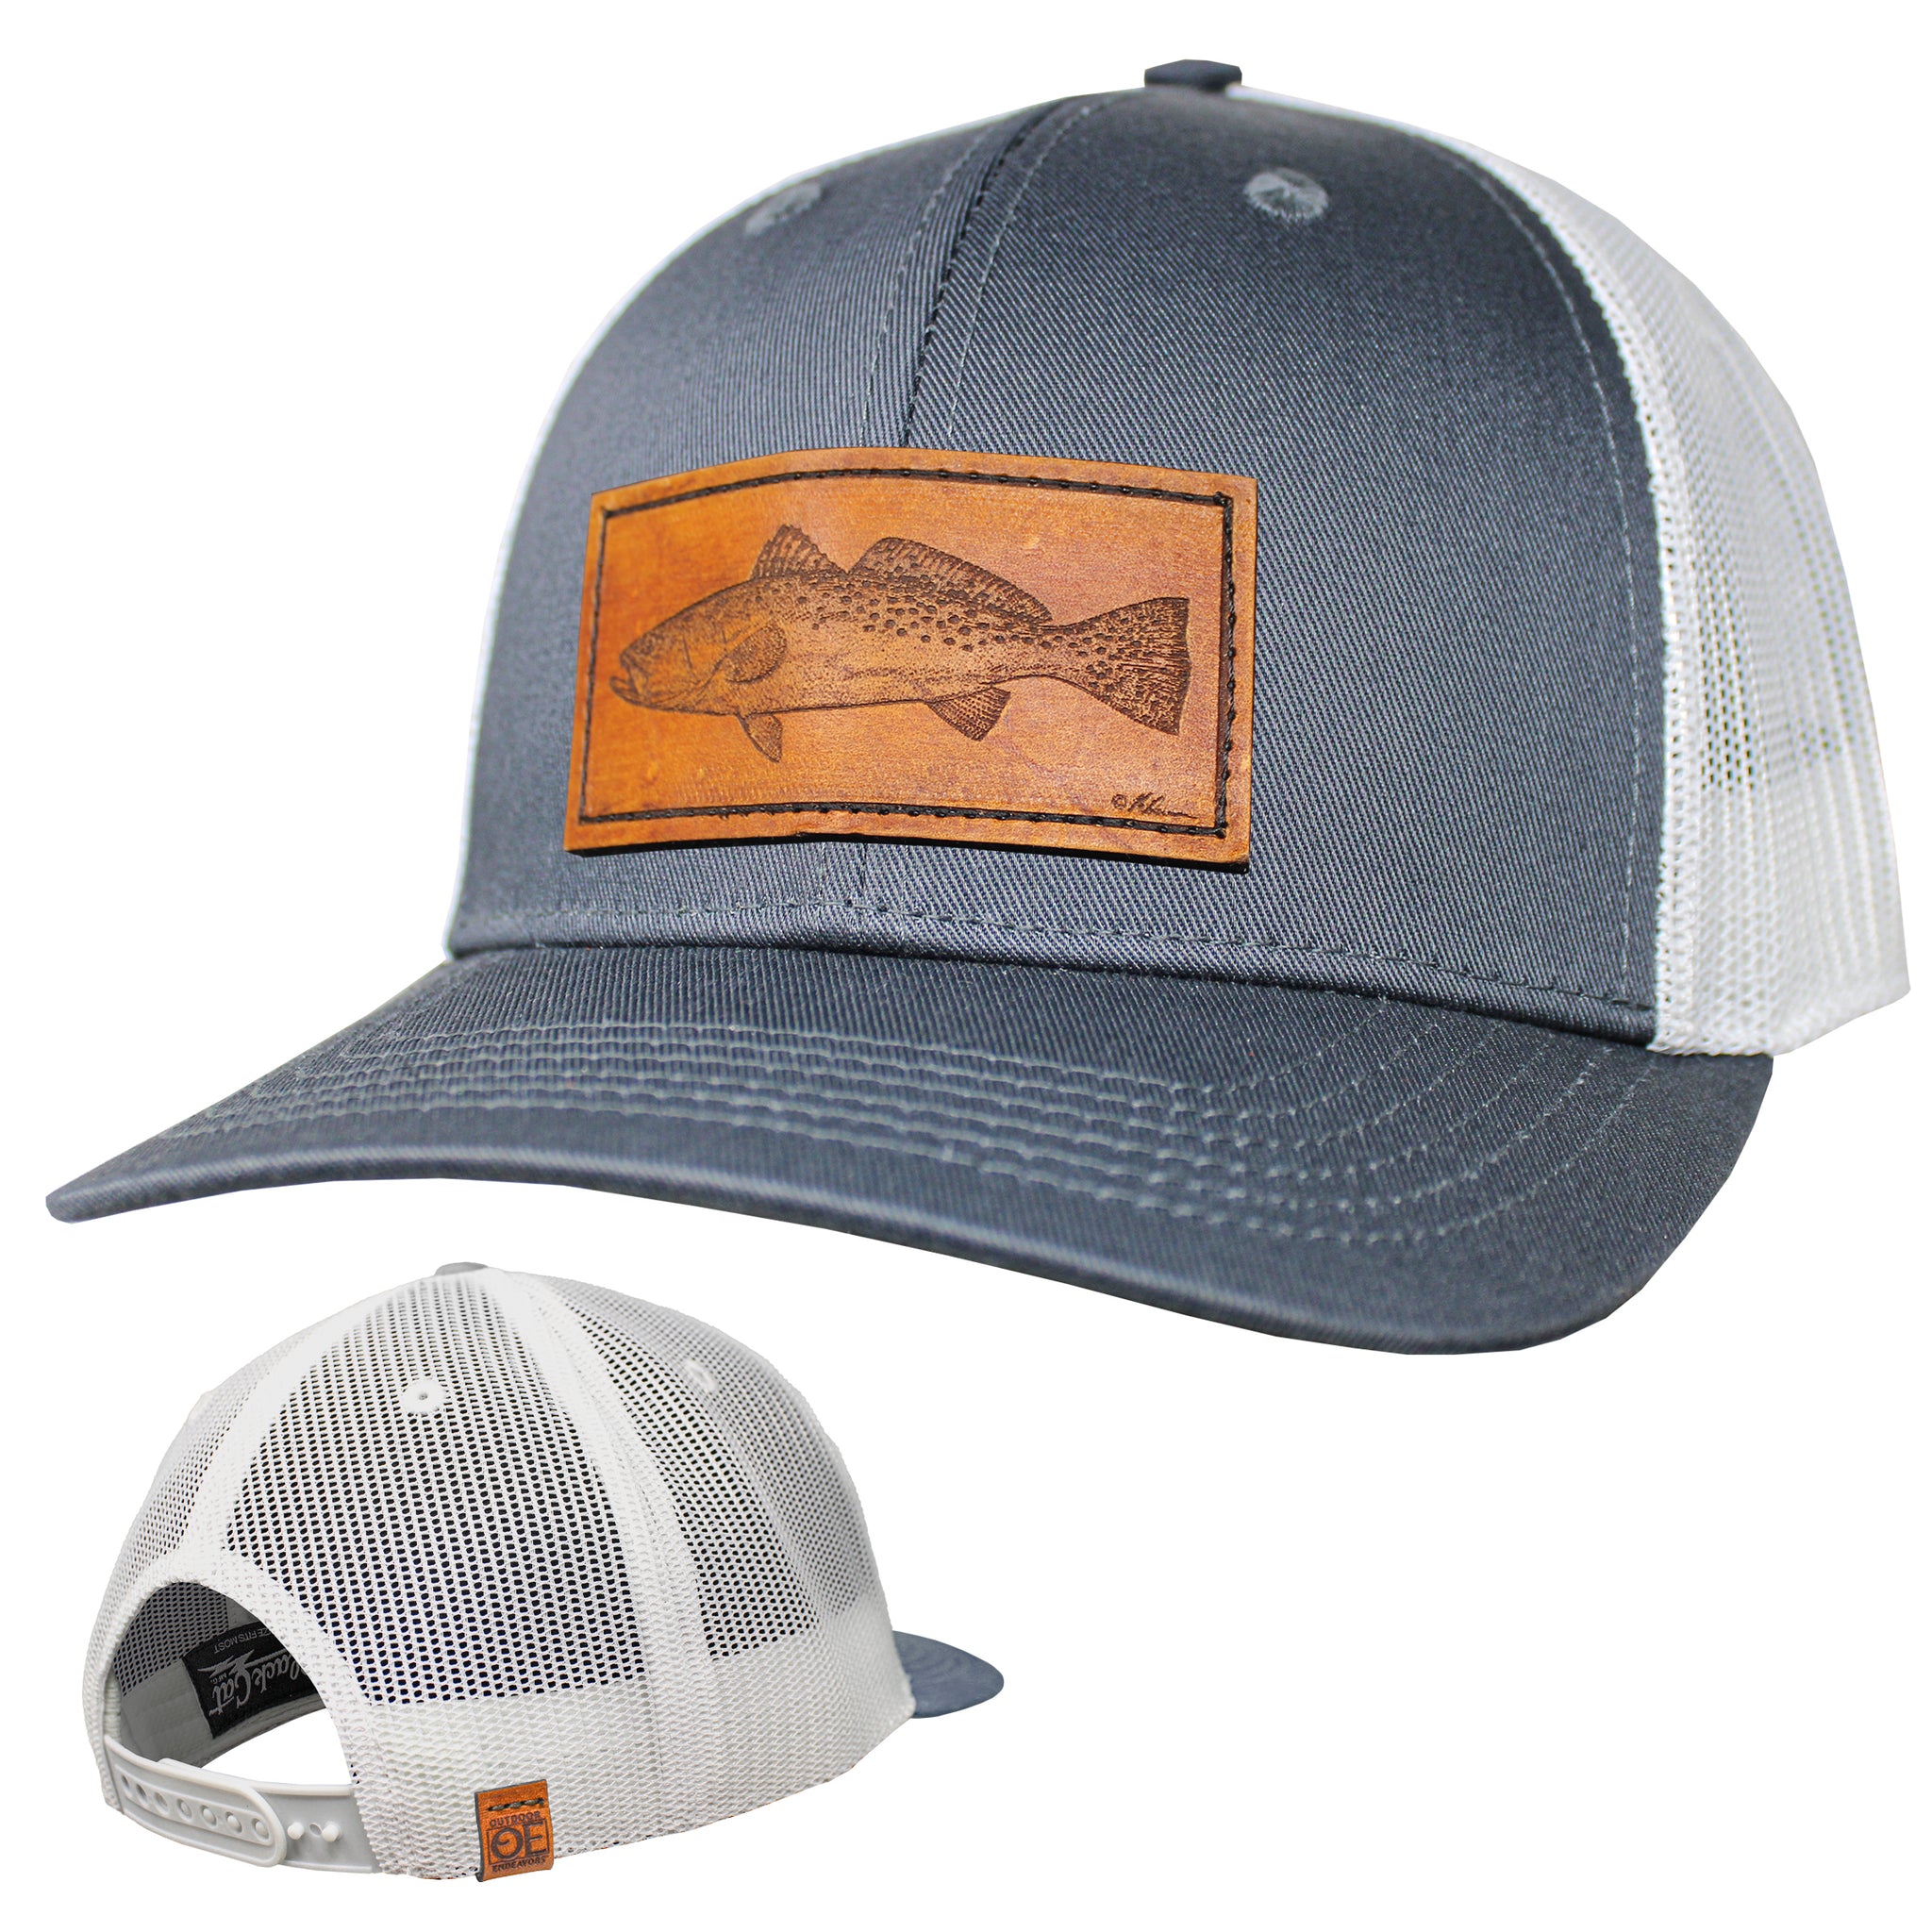 OE - Performance Trucker Hat - Speckled Trout Leather Patch